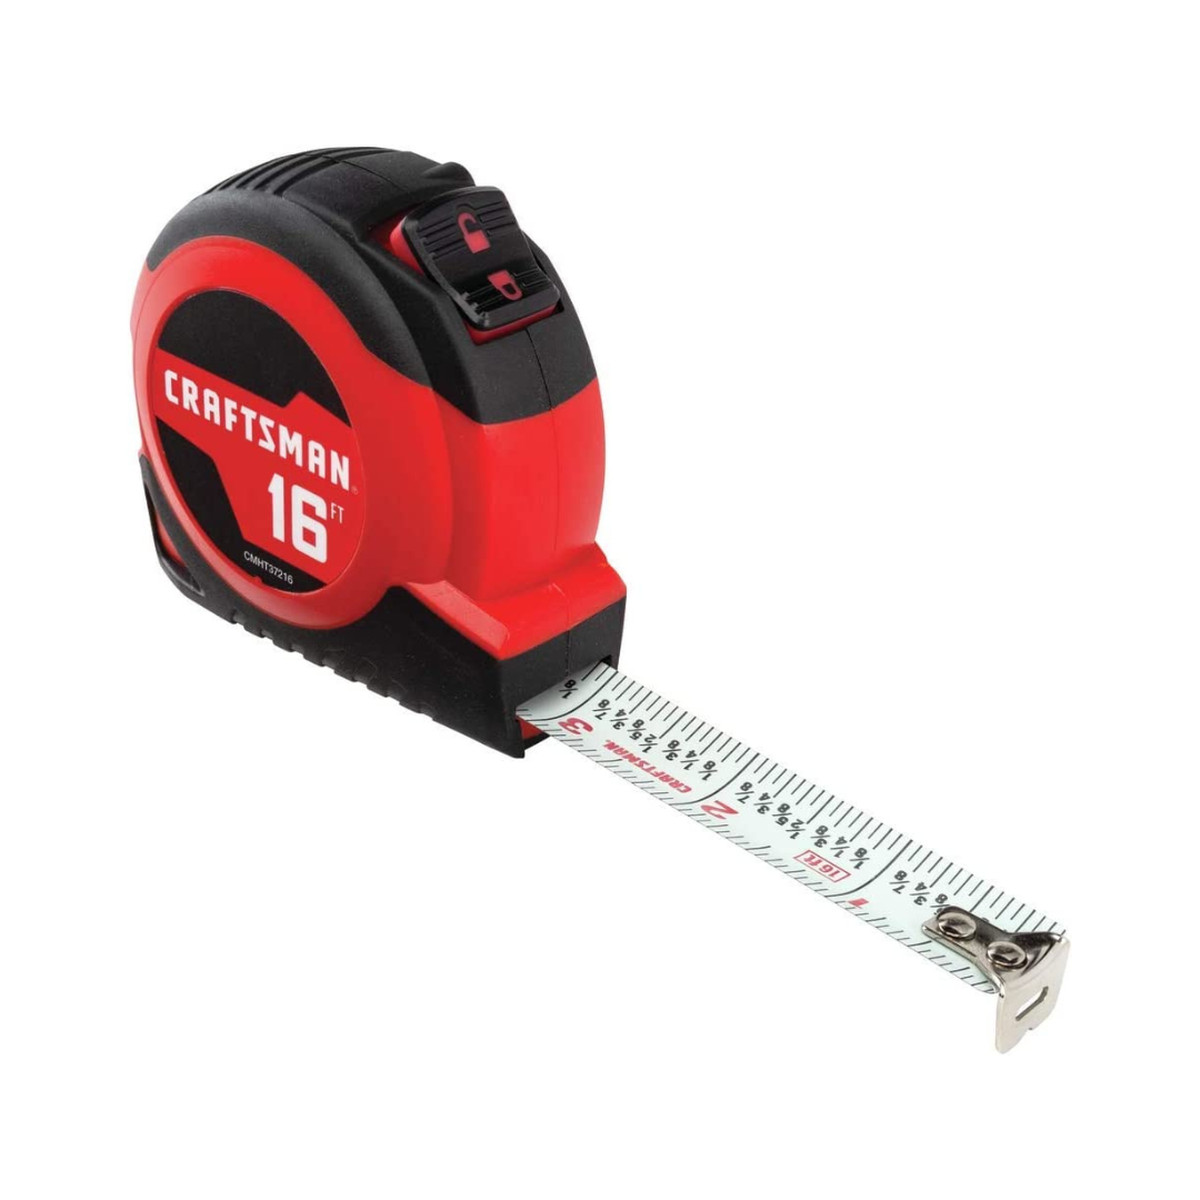 Craftsman CMHT37216S Tape Measure isolated on a white background